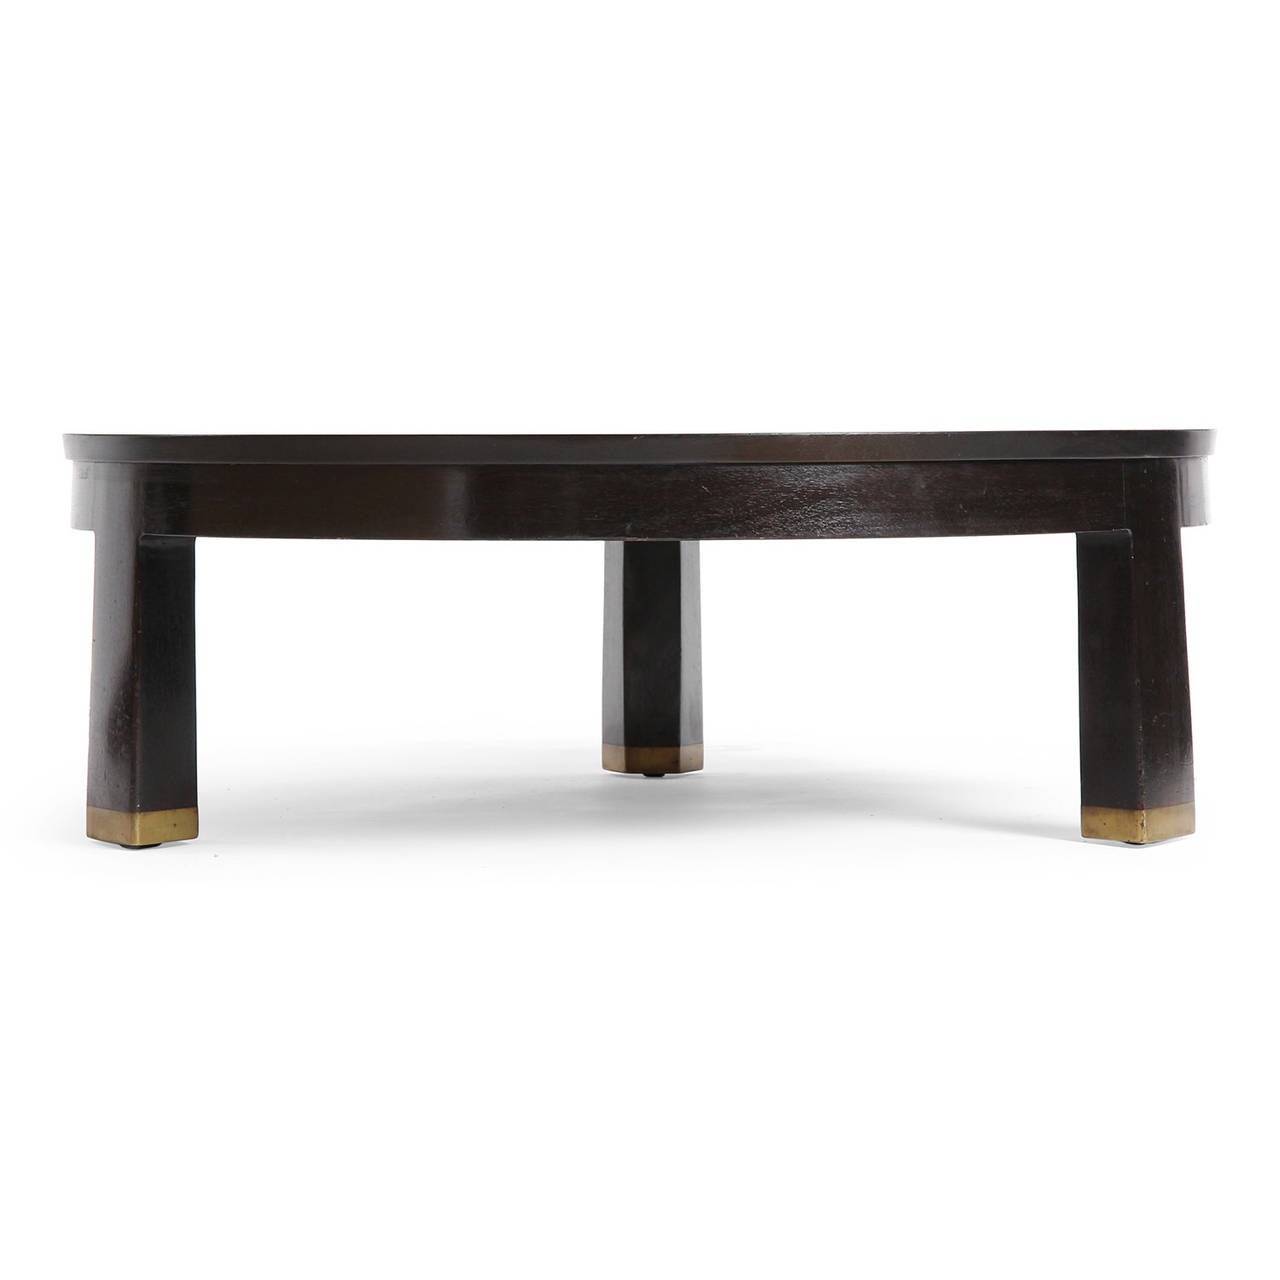 A fine and substantial ebonized mahogany low table having a circular top with a recessed apron floating on three reverse tapered legs with brass feet.